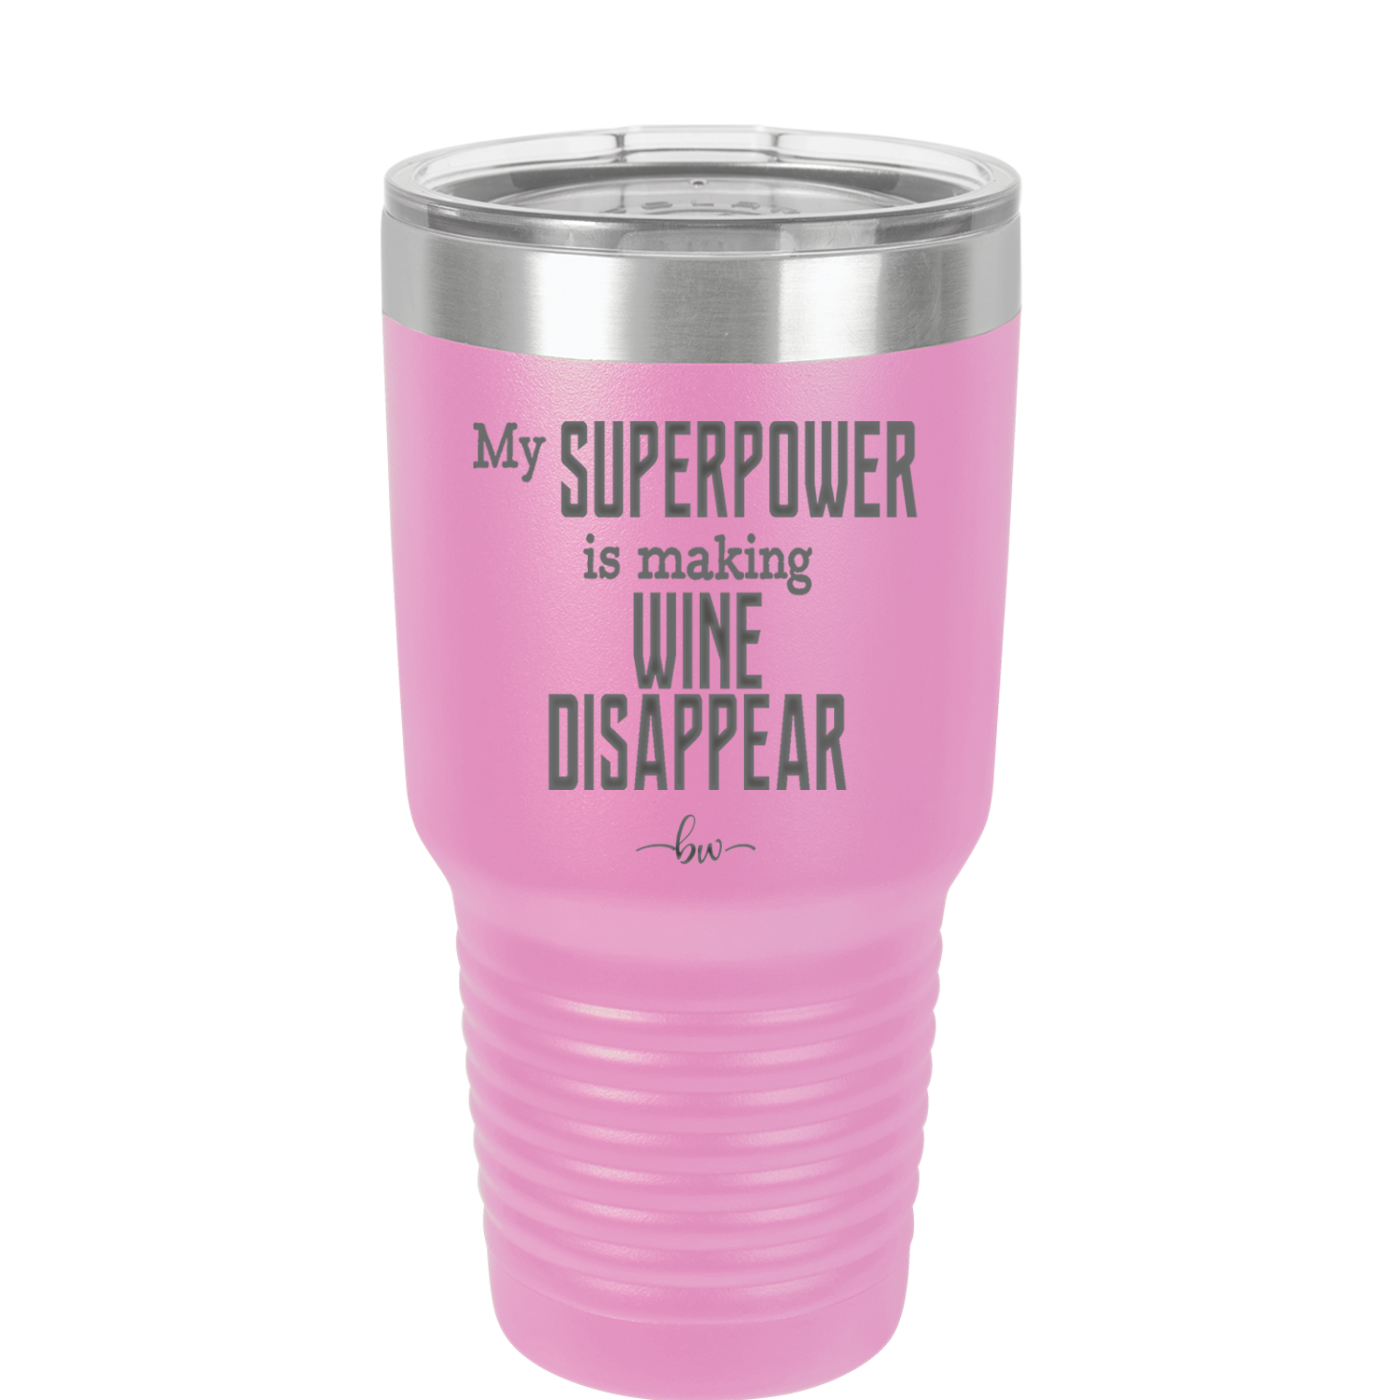 My Superpower is Making Wine Disappear - Laser Engraved Stainless Steel Drinkware - 1079 -